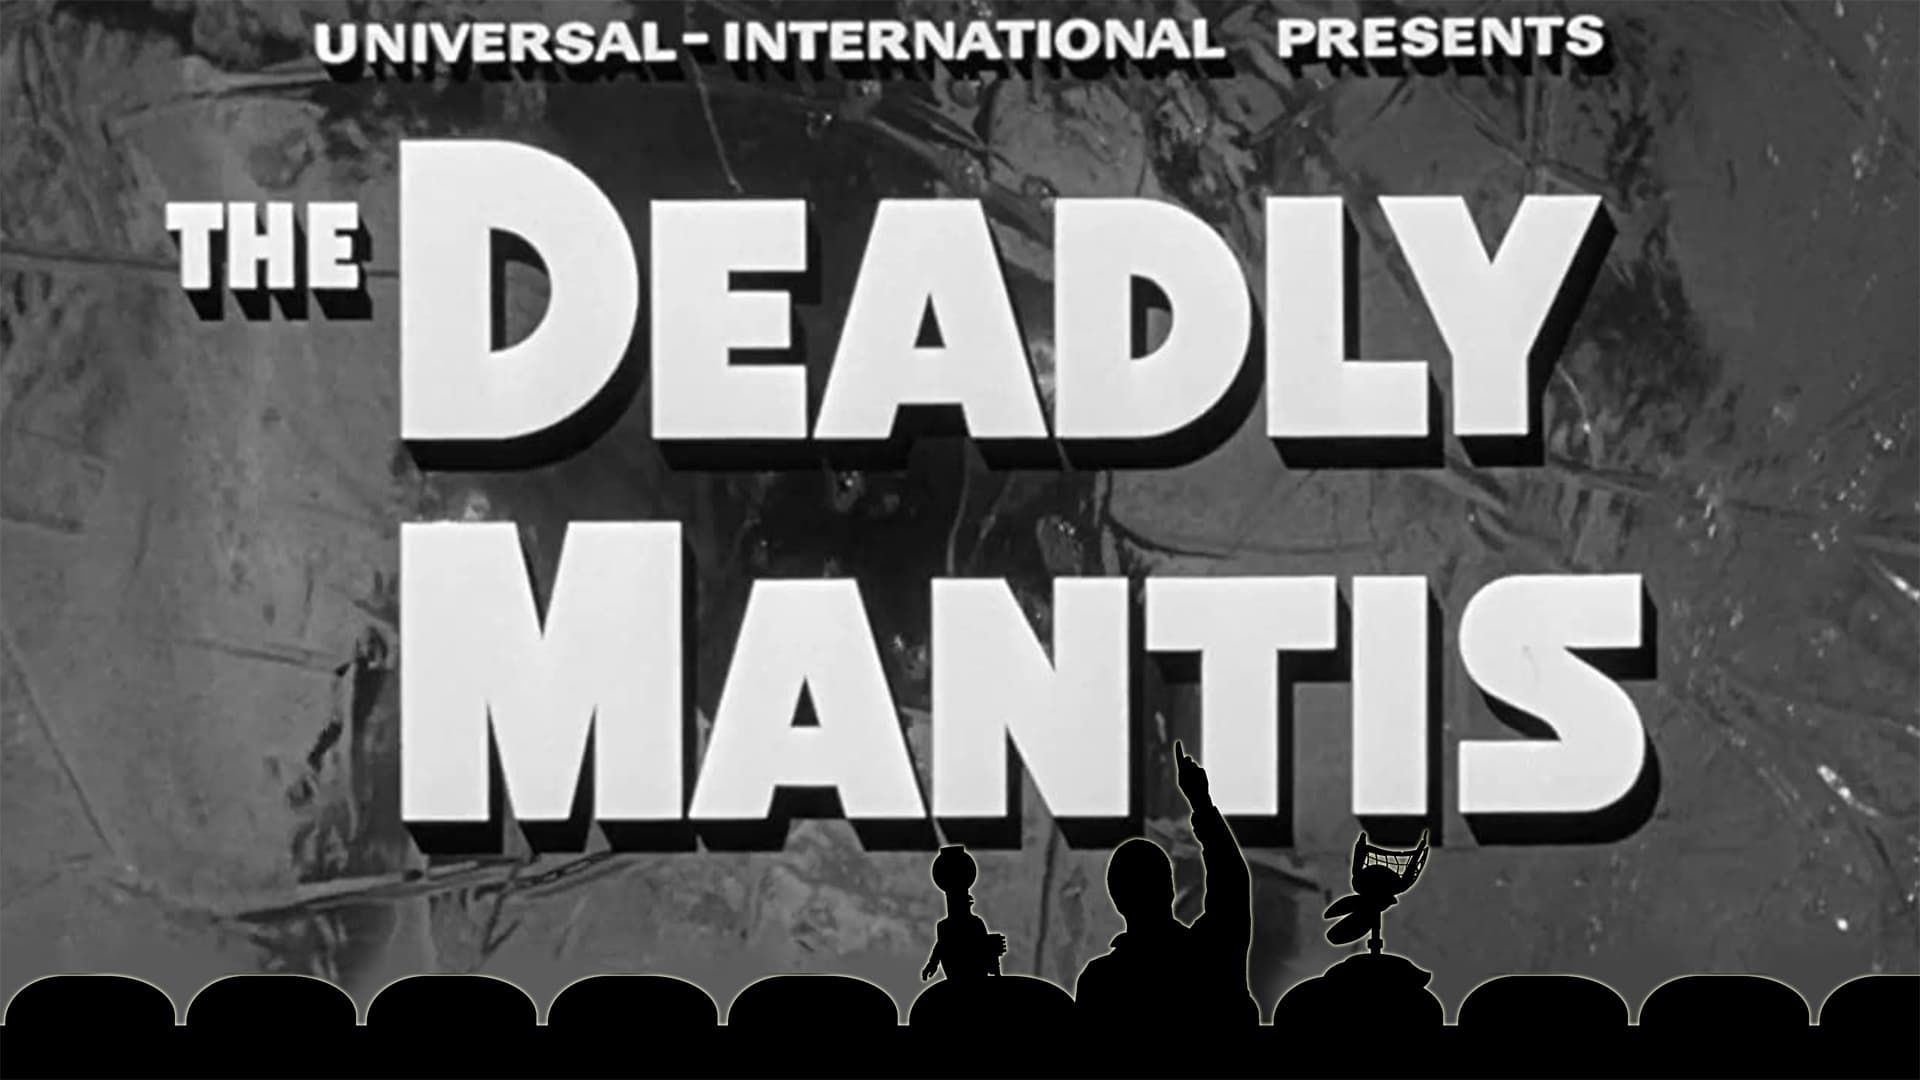 Mystery Science Theater 3000 background